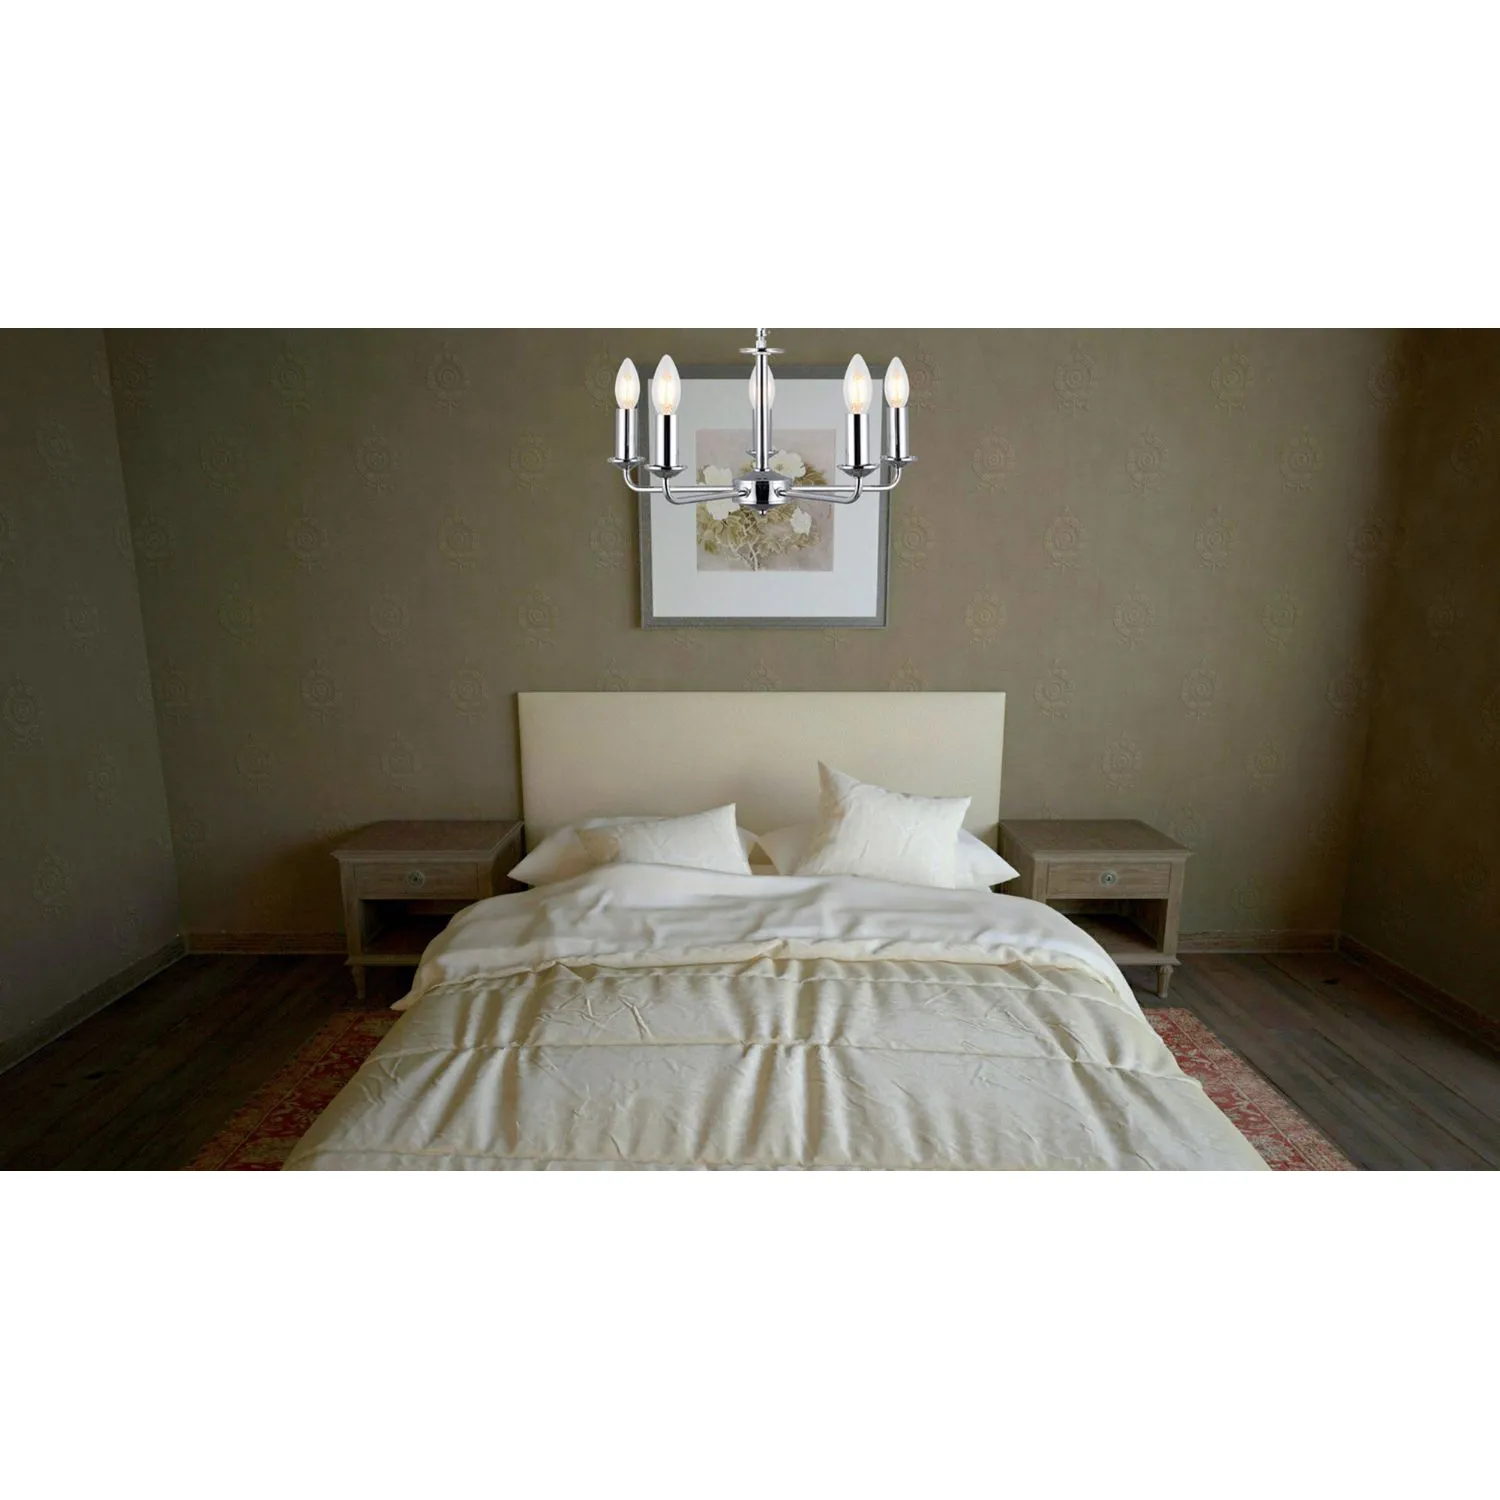 Banyan 2 Light Switched Wall Lamp Without Shade, E14 Polished Nickel